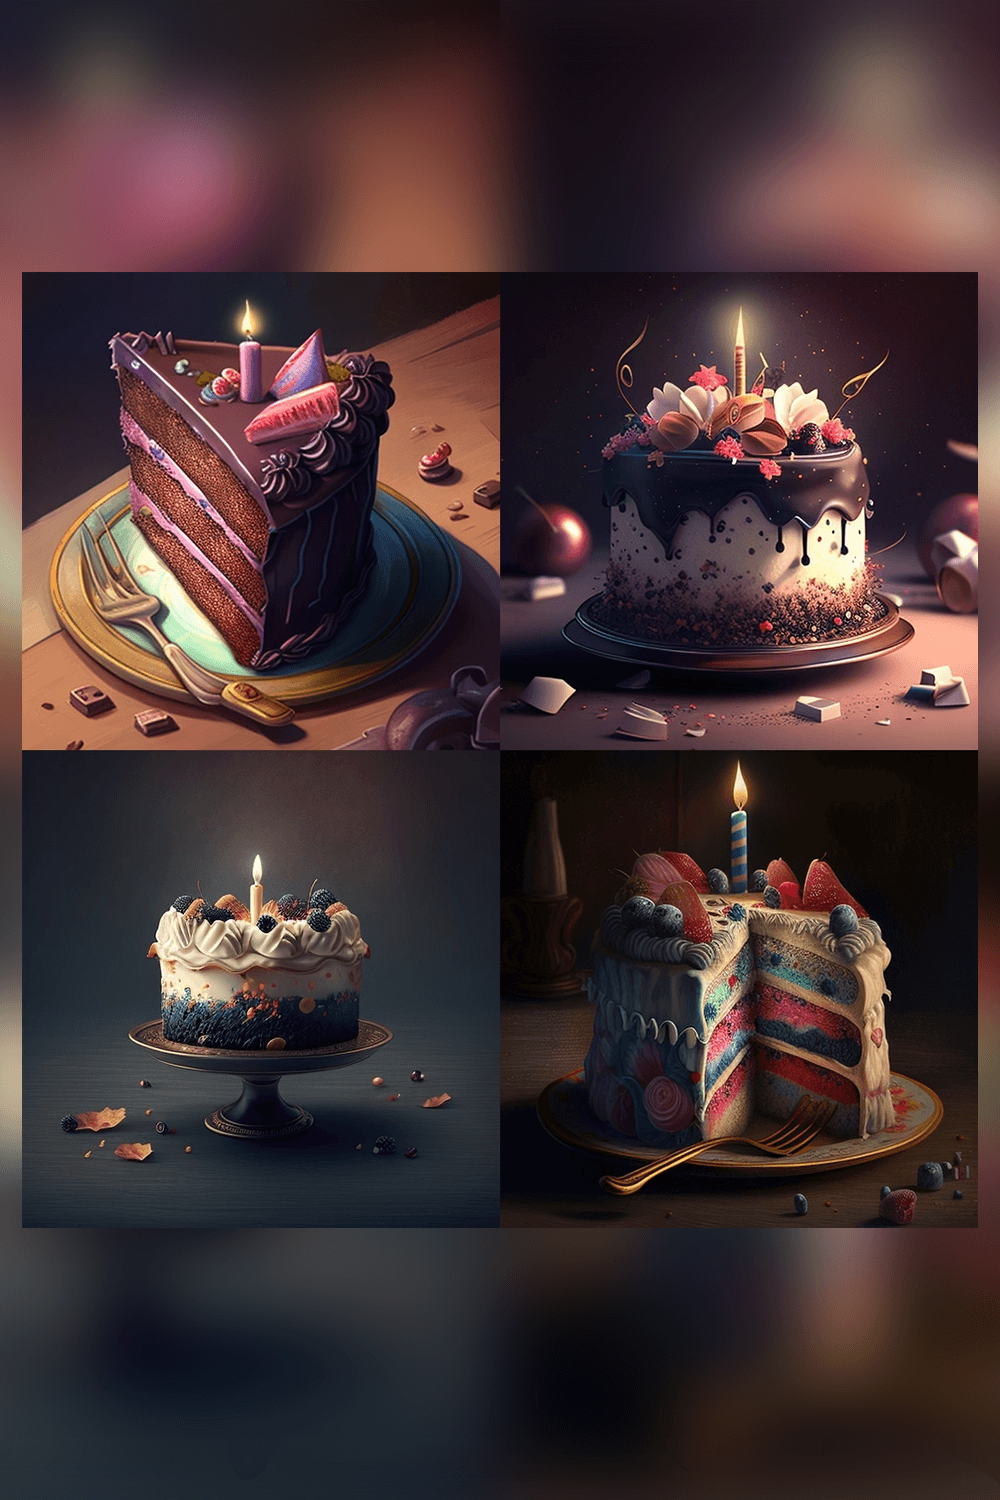 Series of photos showing different types of cakes.